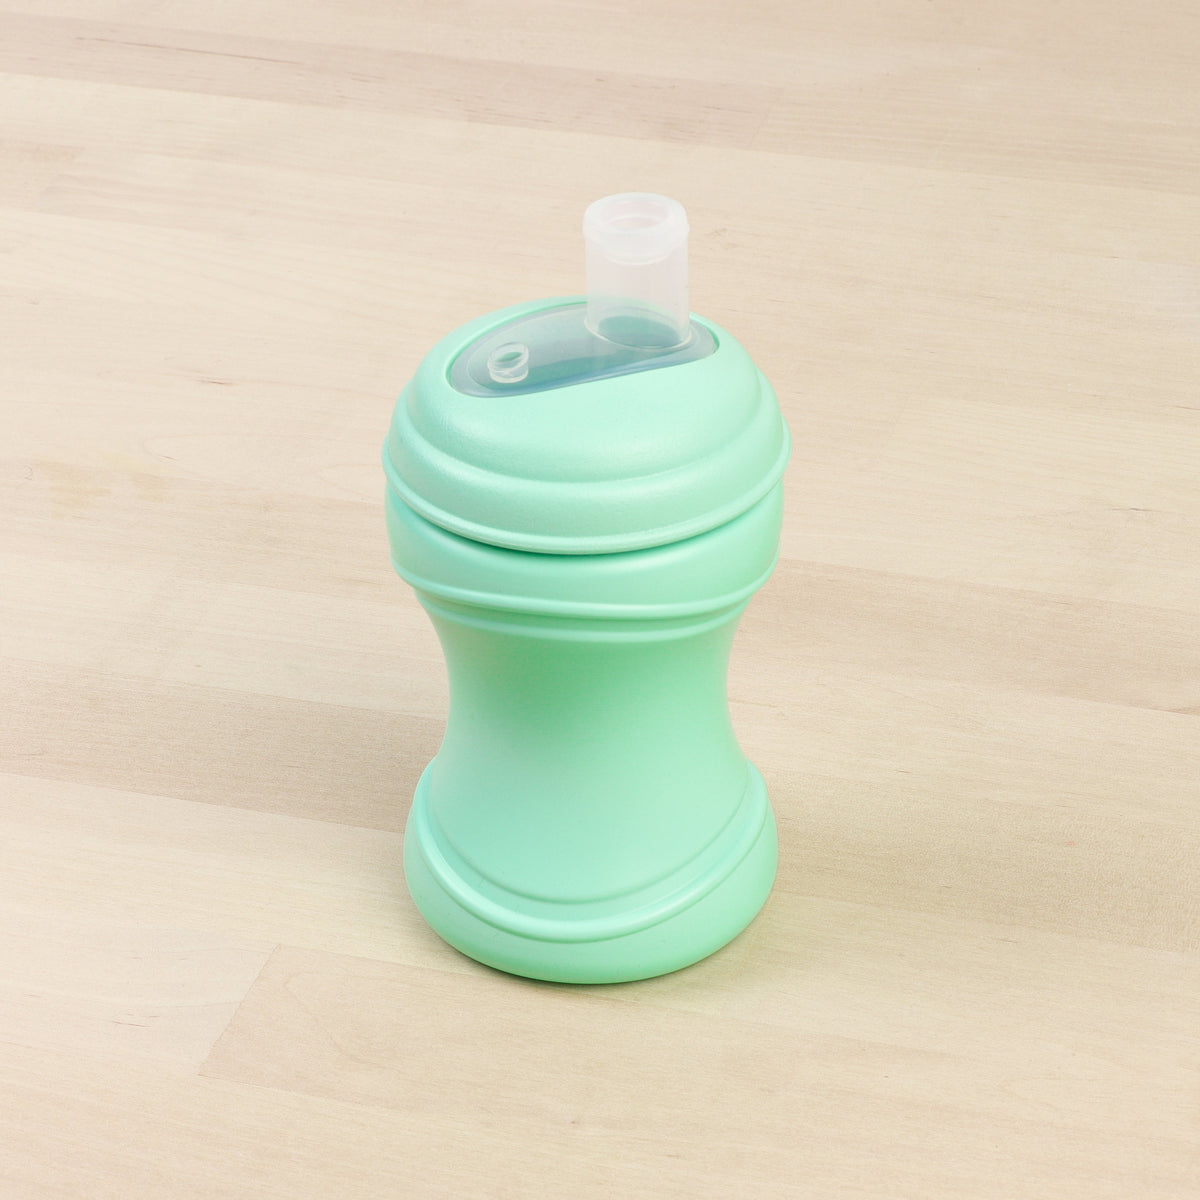 Re-Play Soft Spout Cups - NEWLY IMPROVED REDESIGN